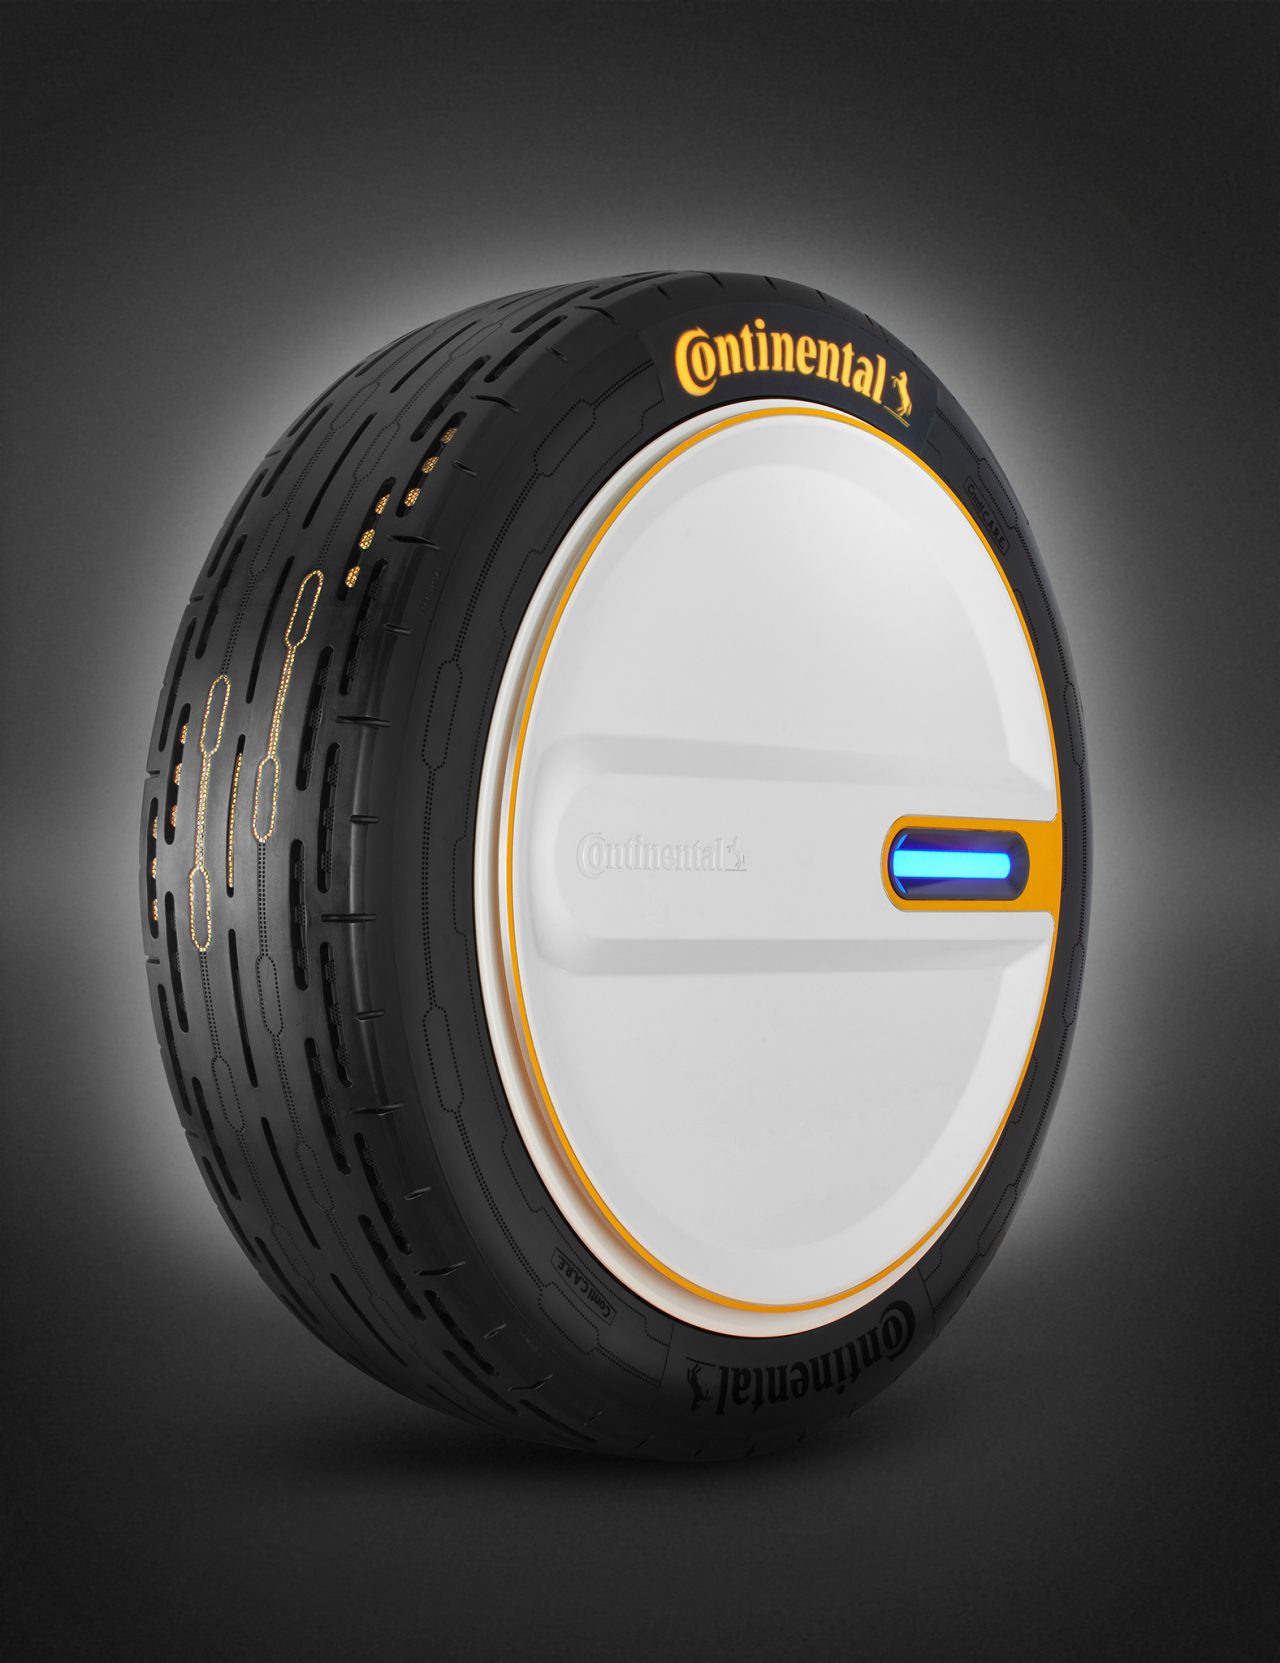 The tire of the future